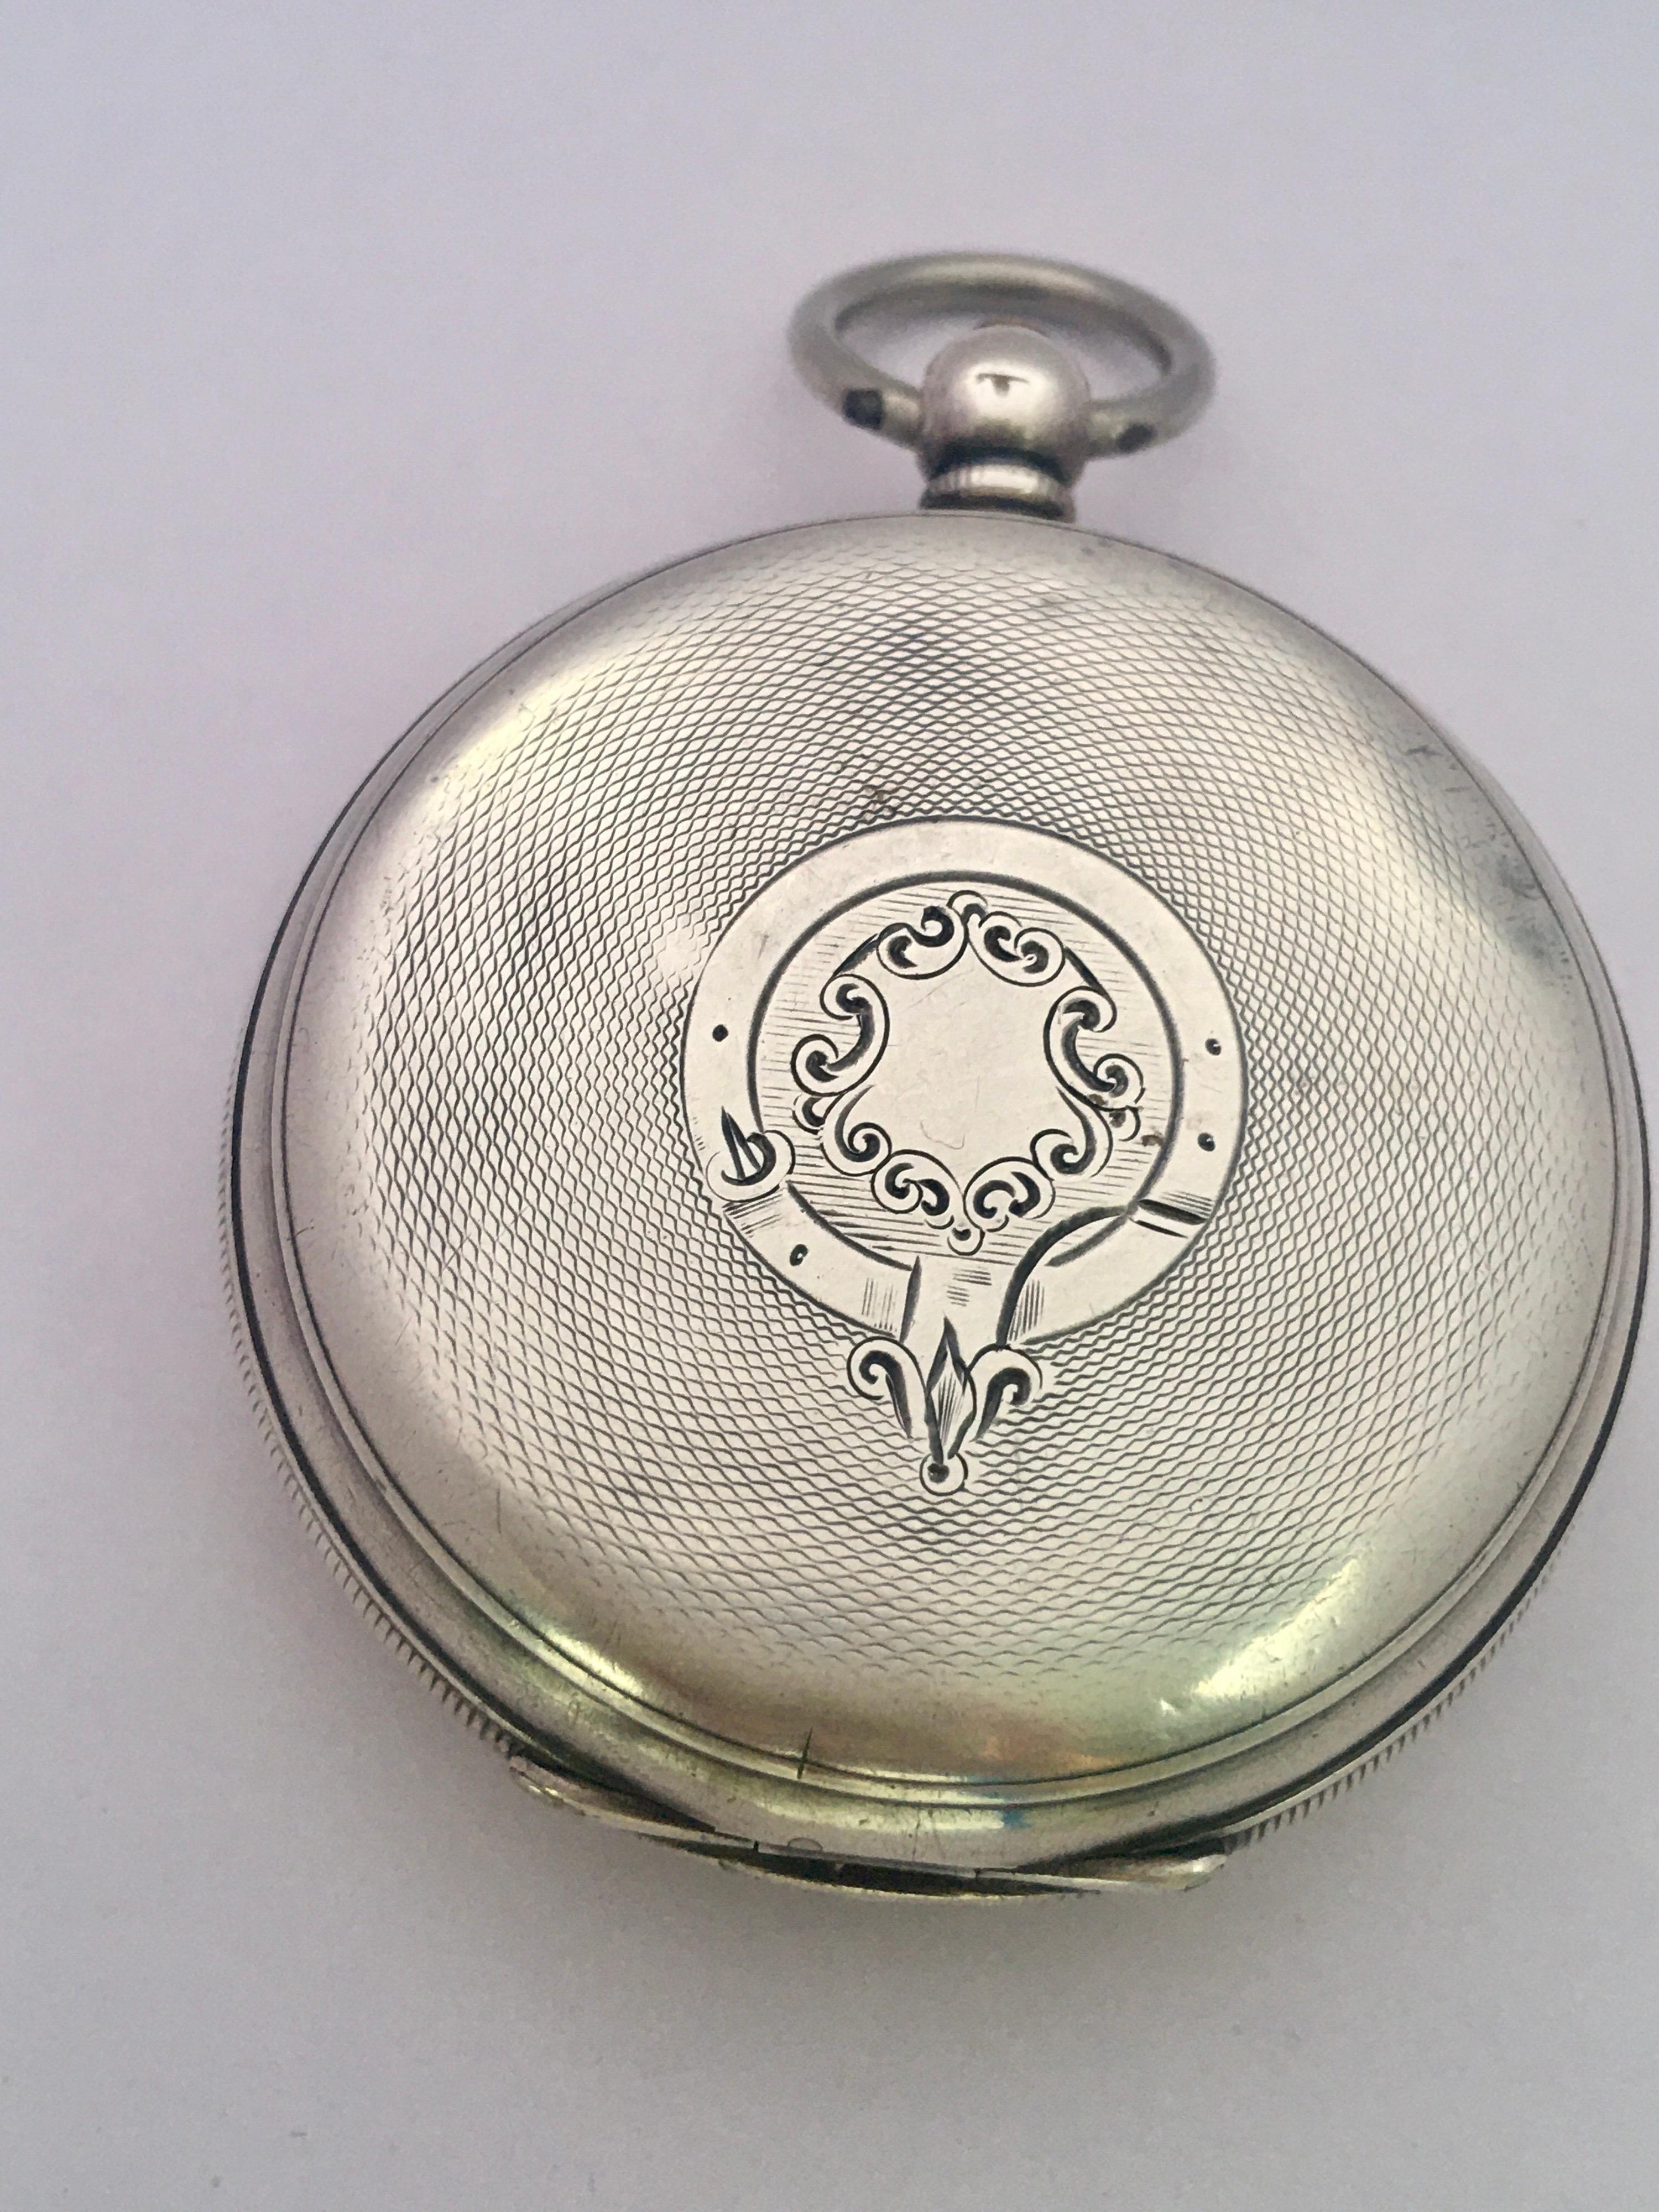 This beautiful 51mm diameter (excluding crown) key winding silver Pocket watch is in good working condition and it is ticking. It is recently been serviced and runs well. Visible signs of ageing and wear with light scratches and dents on the silver